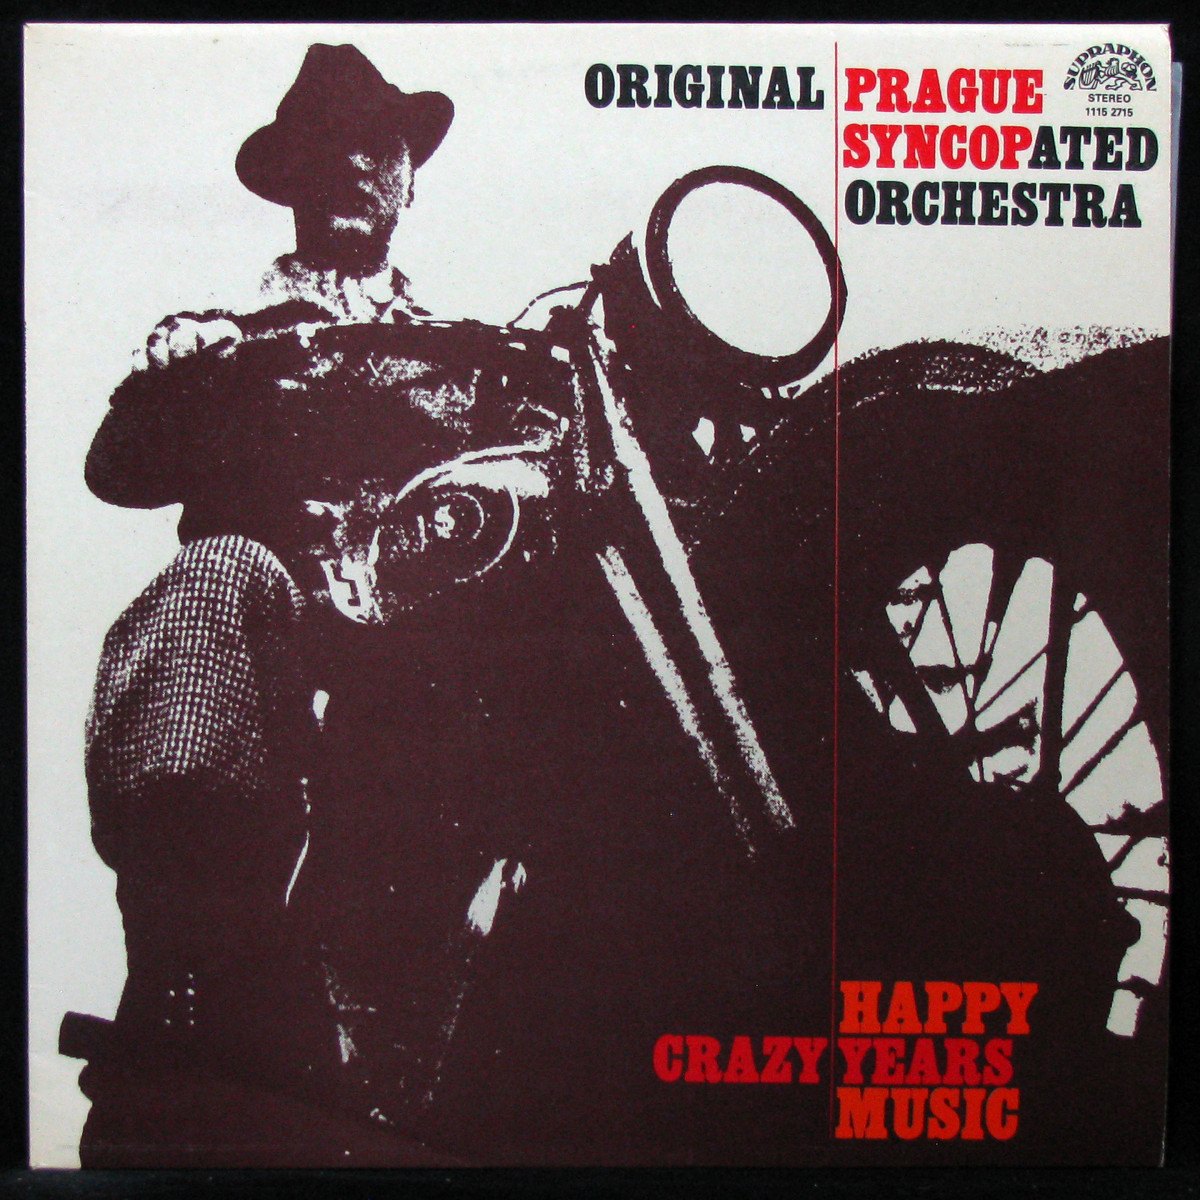 LP Original Prague Syncopated Orchestra — Crazy Years - Happy Music фото